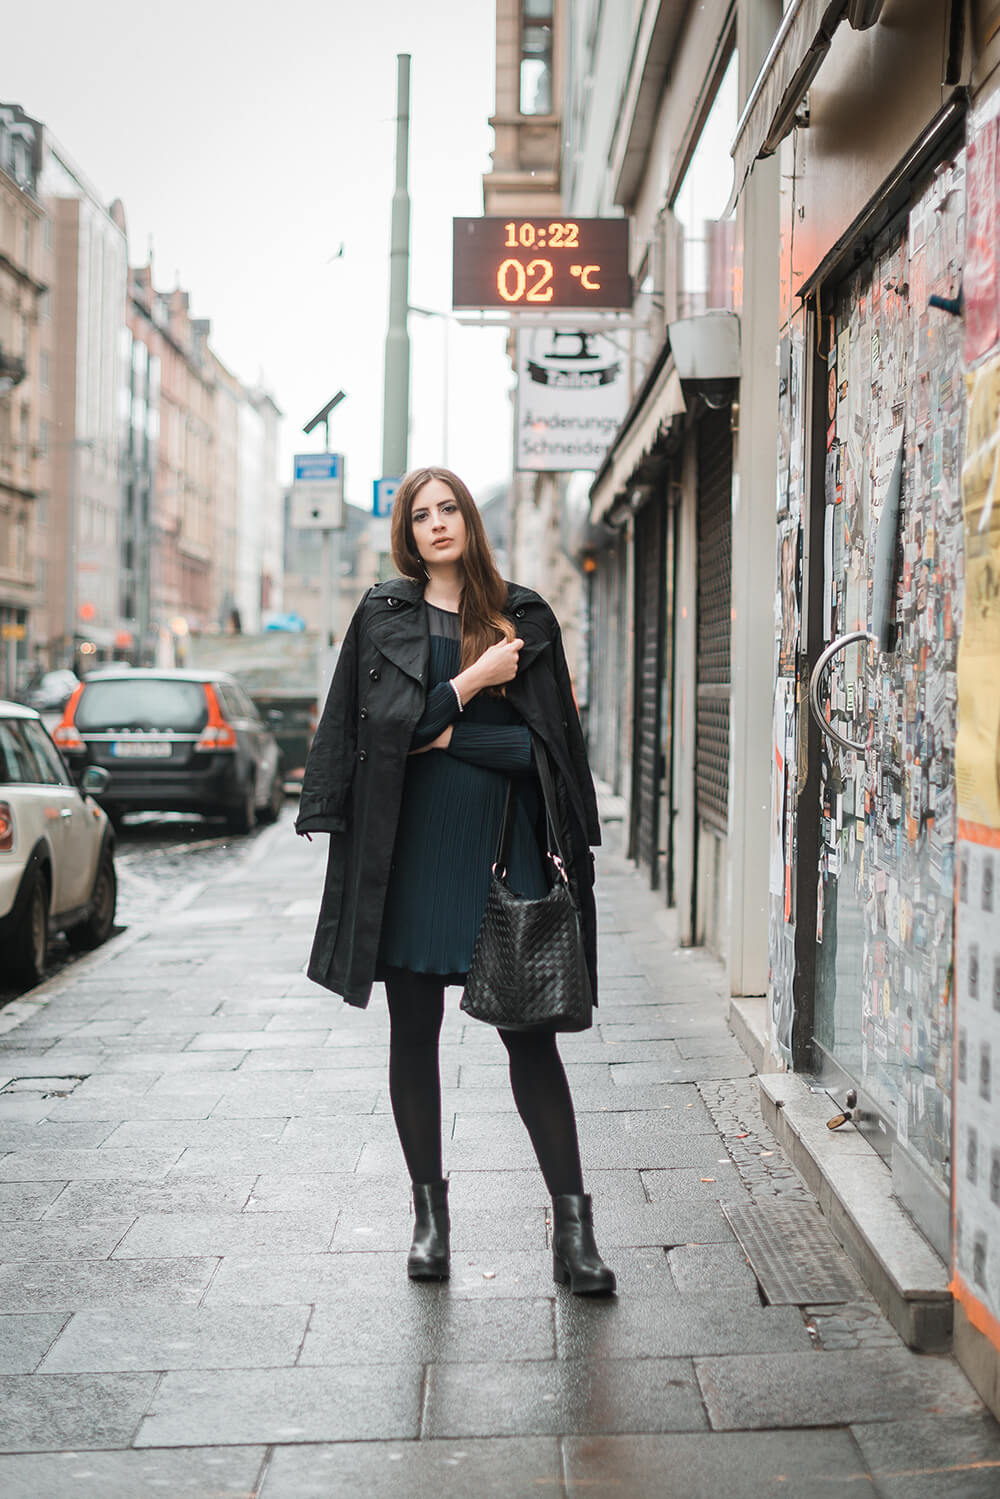 Trenchcoat kombinieren-Boots 5th Avenue-Modeblog-Outfit Frühling-andysparkles